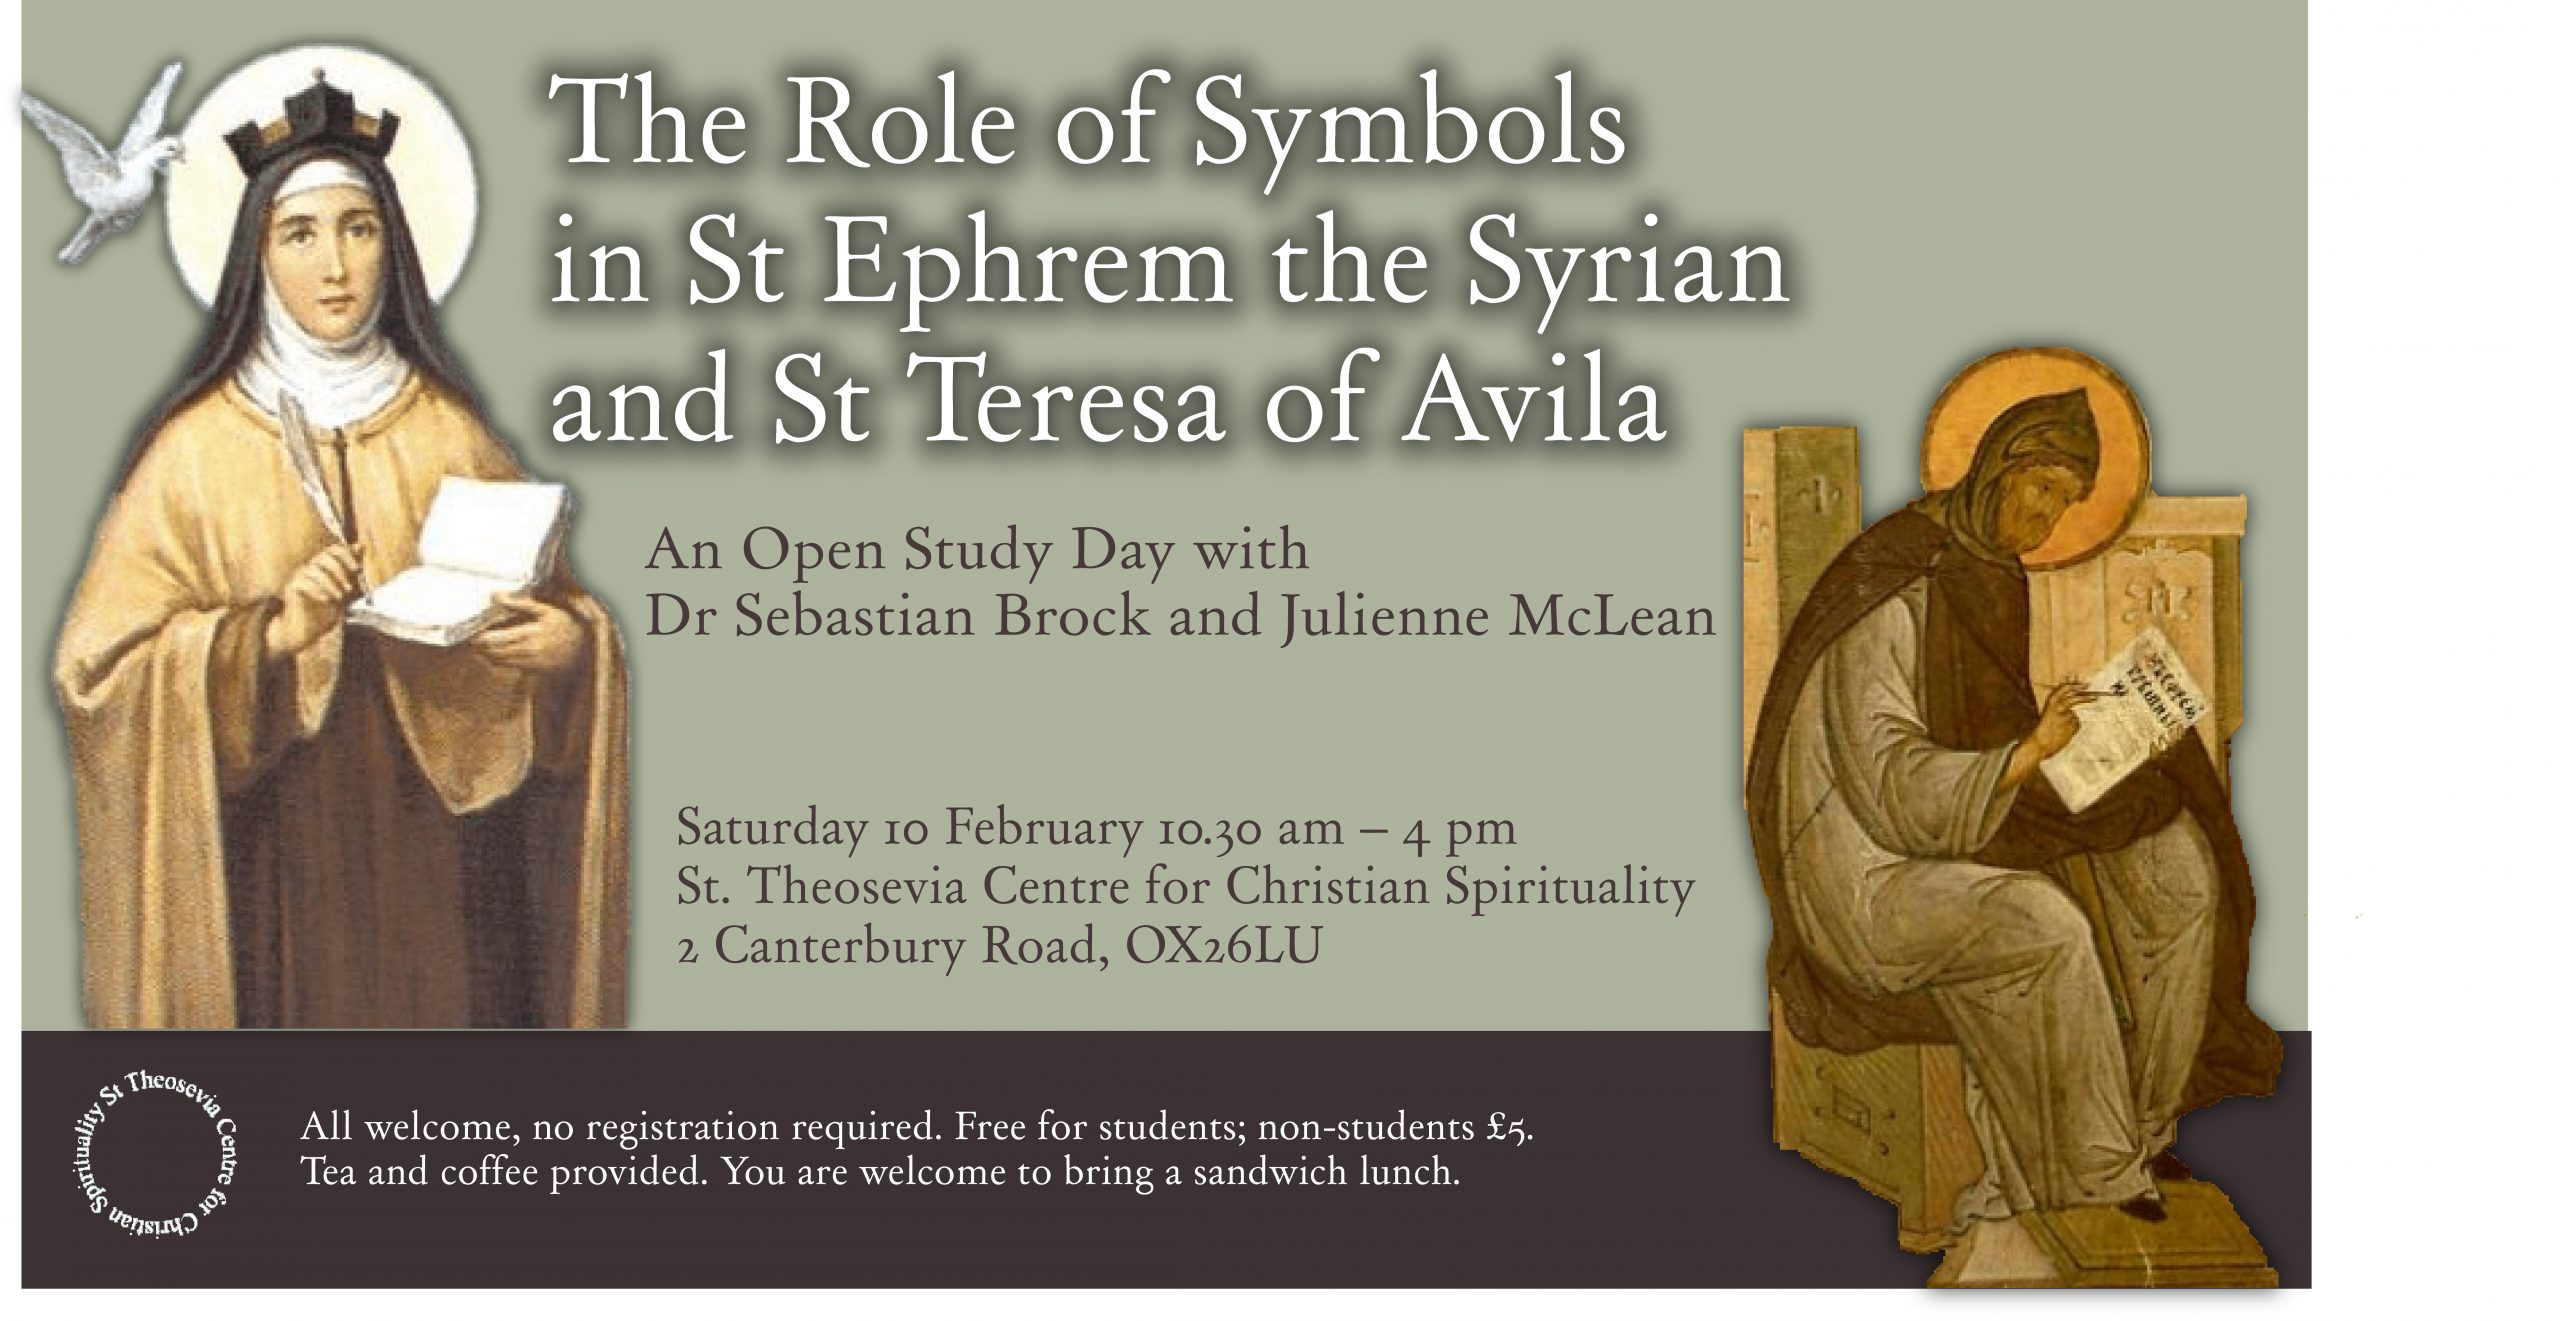 The Role of Symbols in St Ephrem the Syrian and St Teresa of Avila